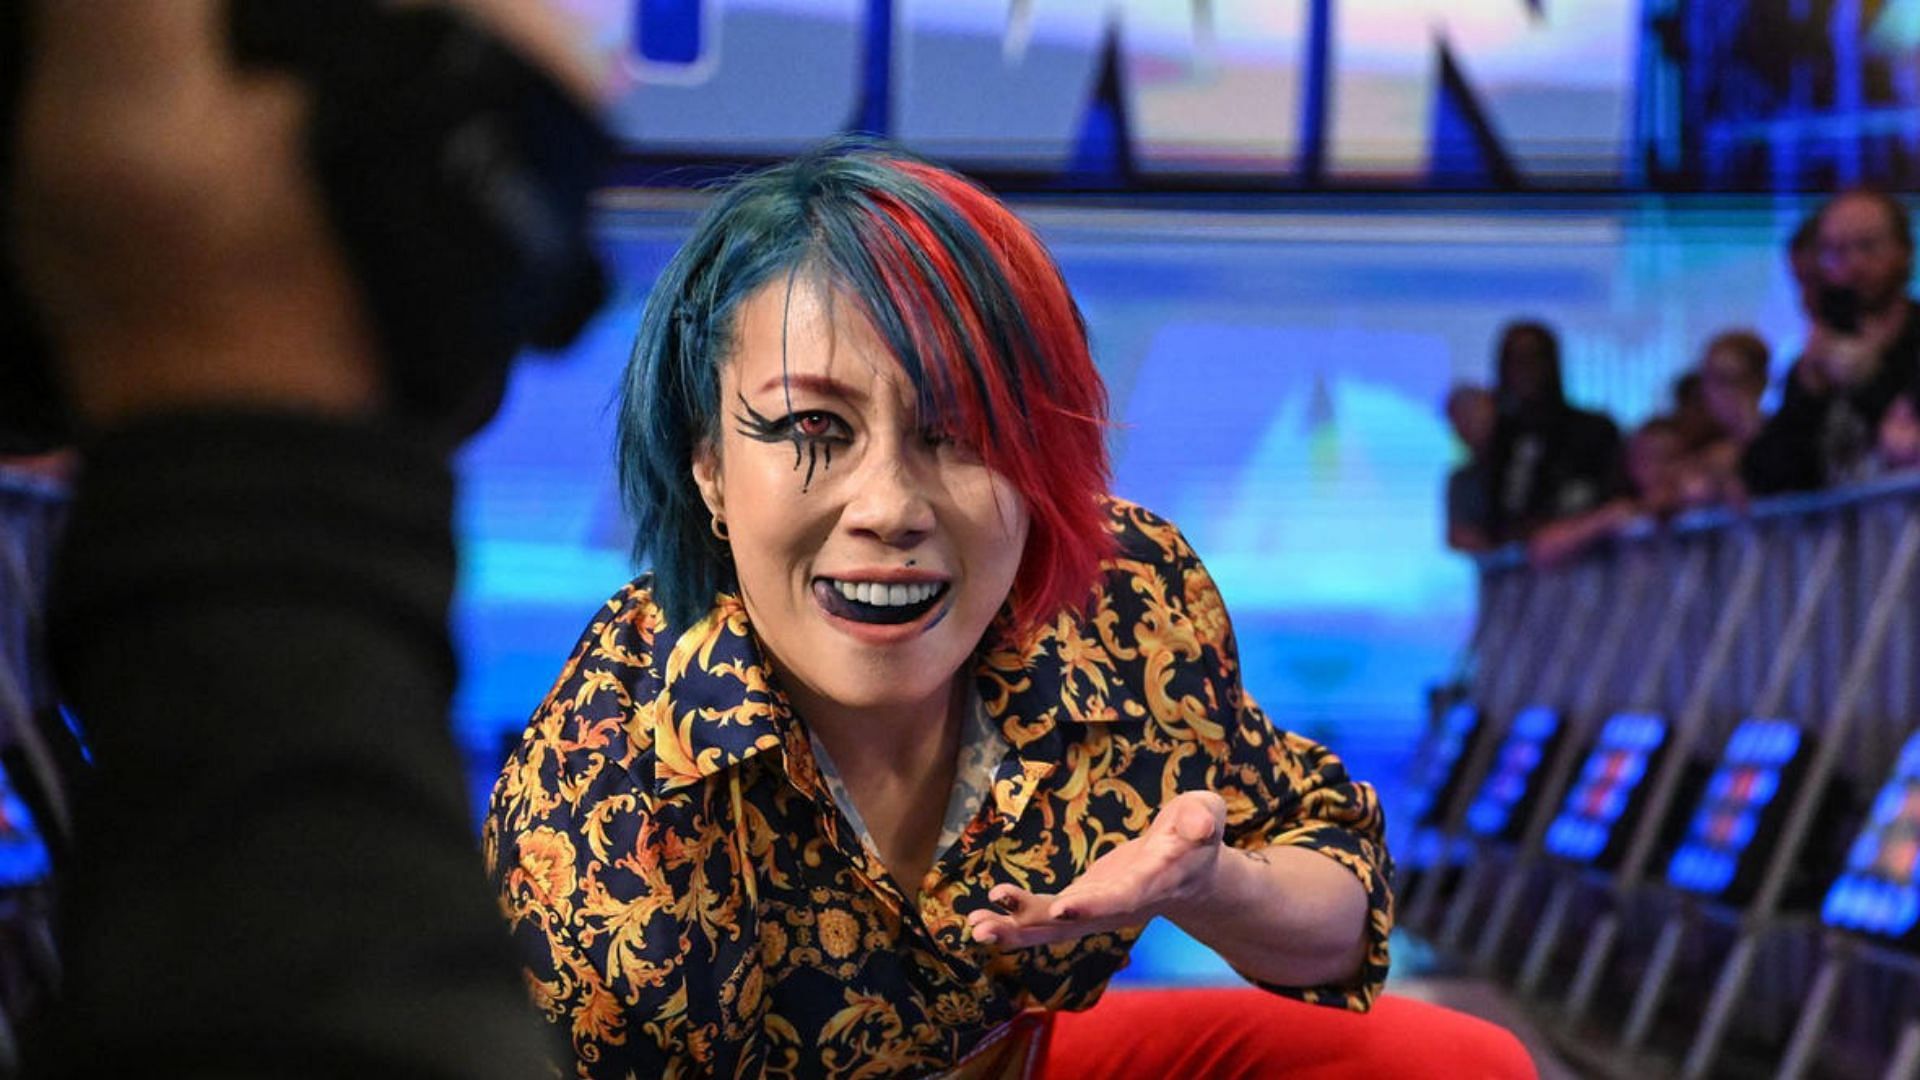 Asuka is the current WWE Women